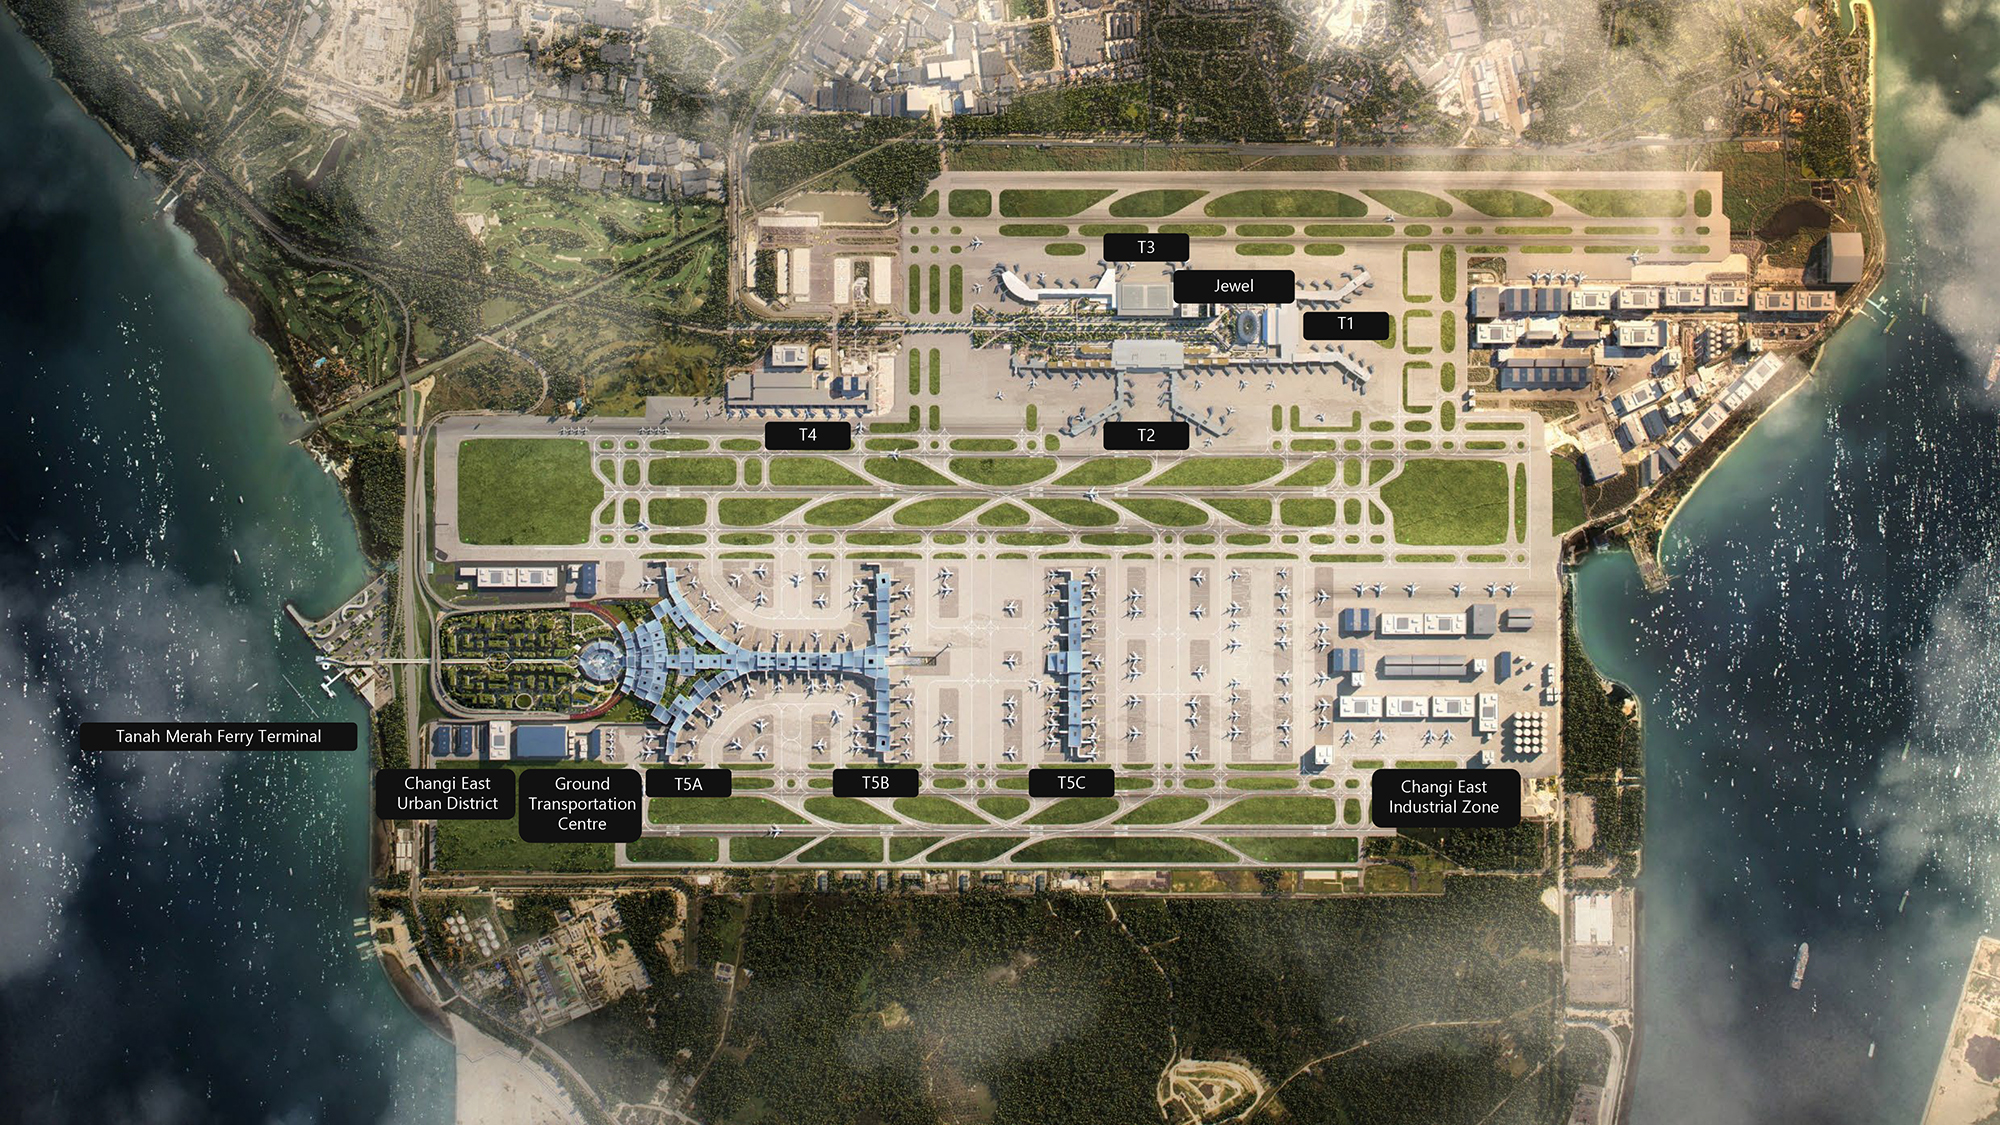 overall plan (Rendering courtesy of Changi Airport Group)